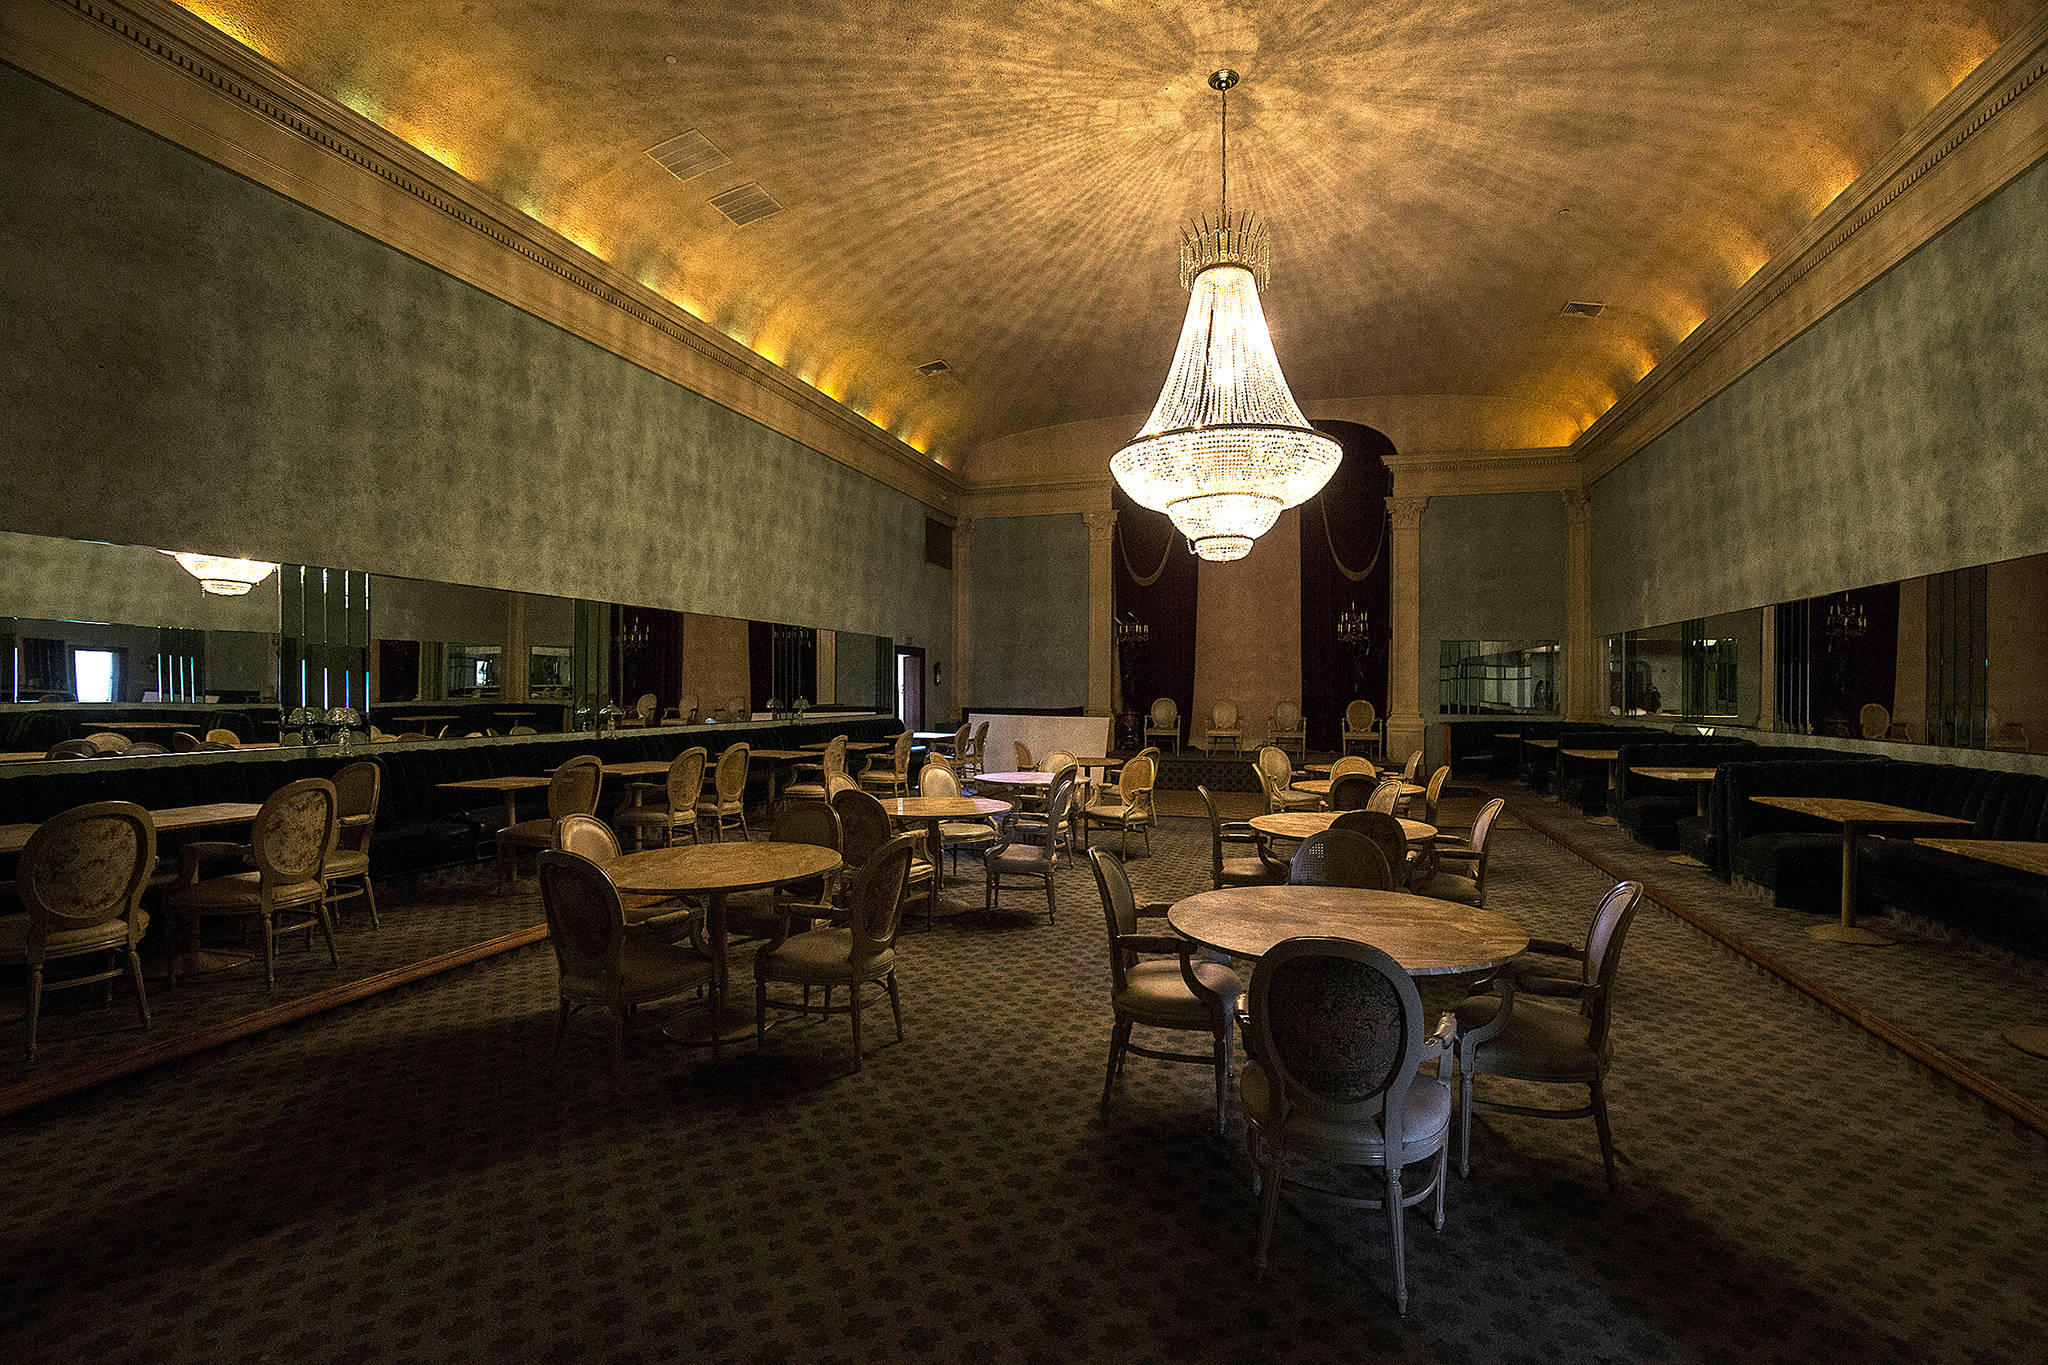 The Manhattan Room restaurant is still lit by a massive chandelier in the former Club Broadway building in Everett. (Andy Bronson / The Herald)